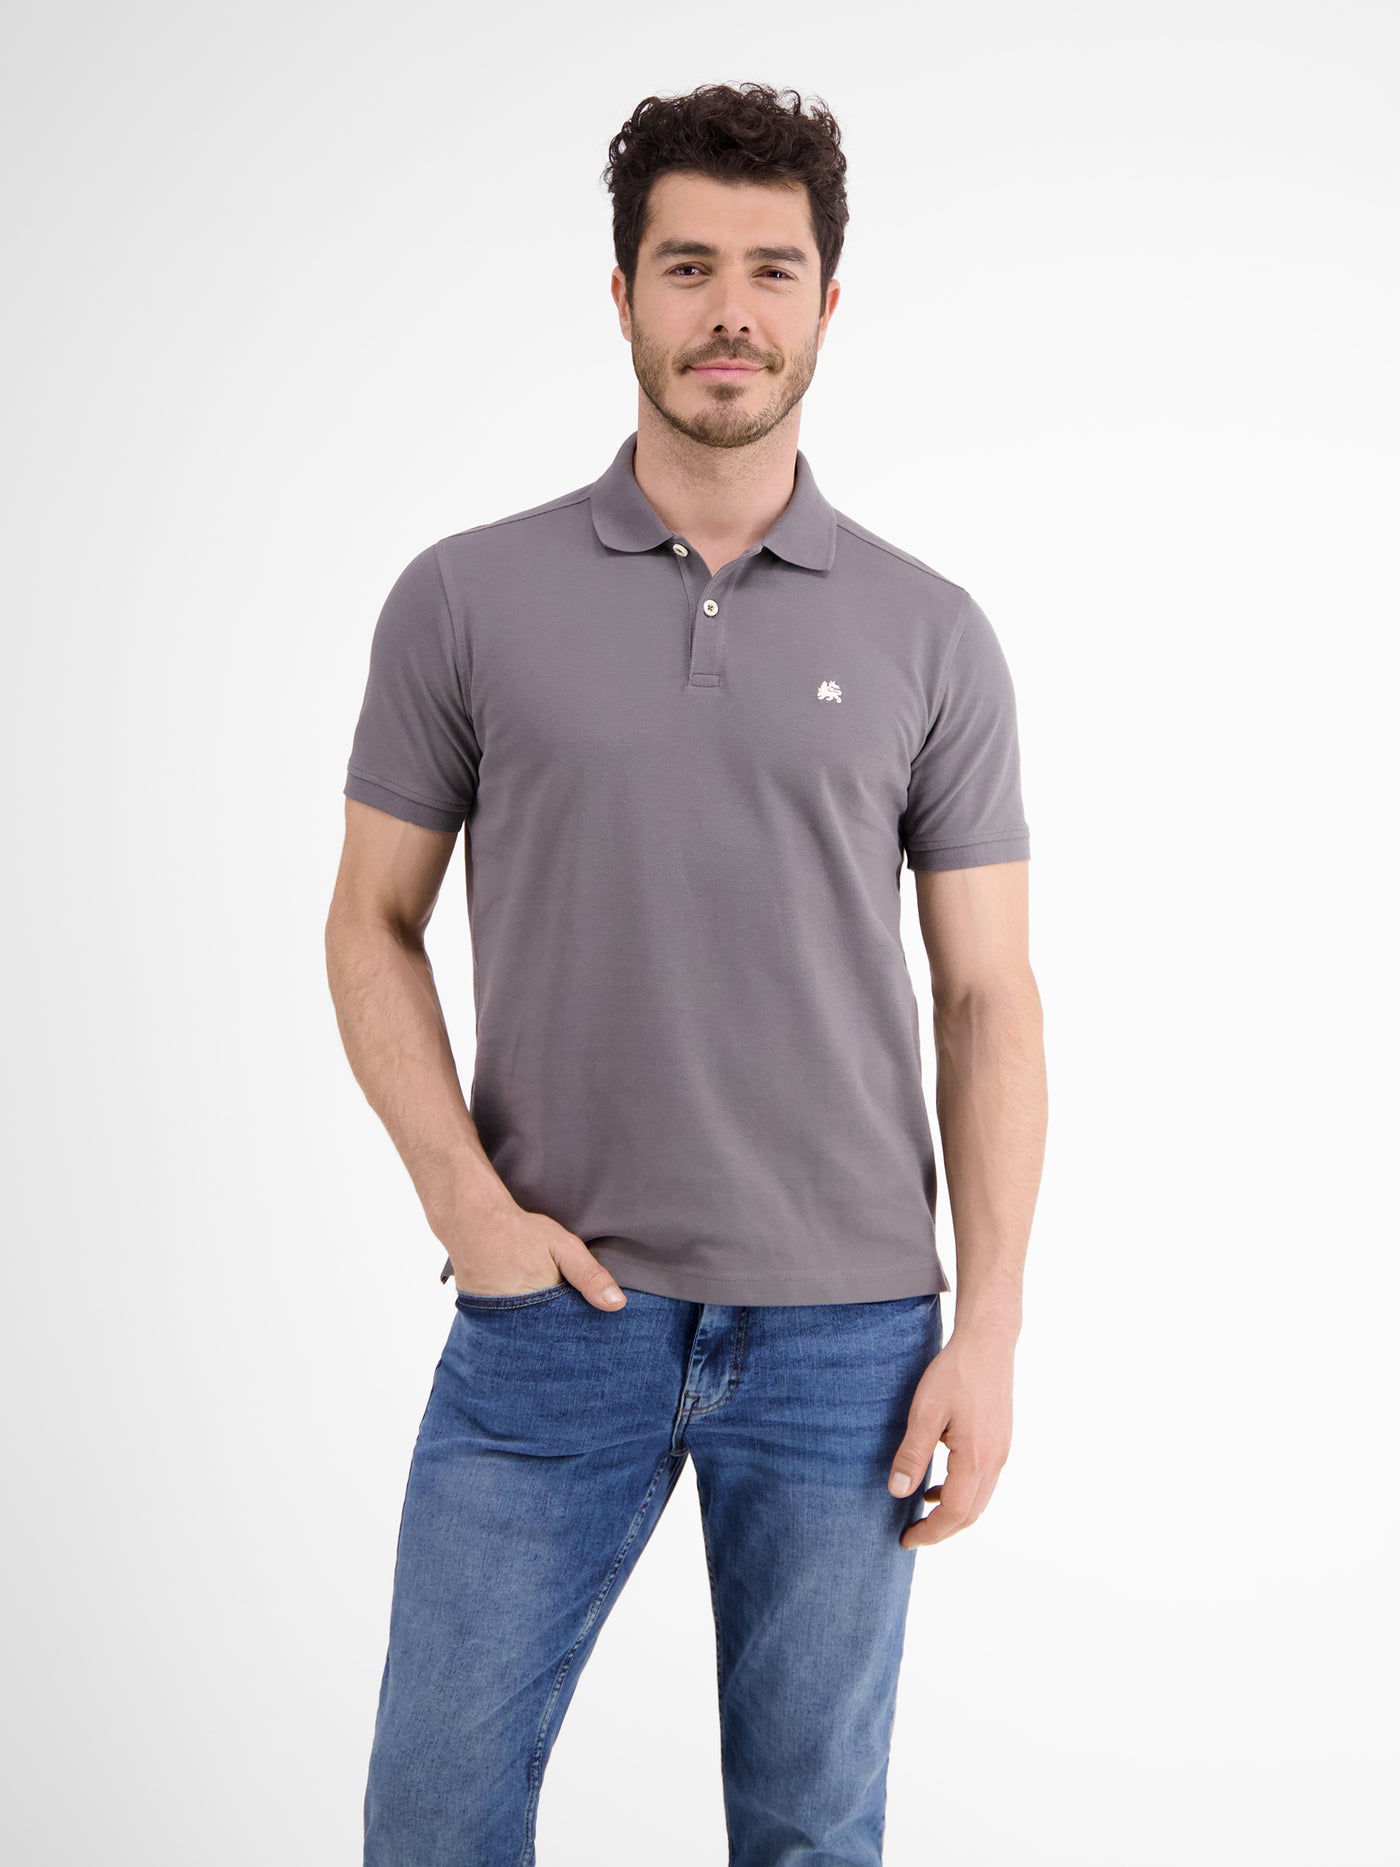 Piqué polo shirt in high-quality cotton, BCI-certified